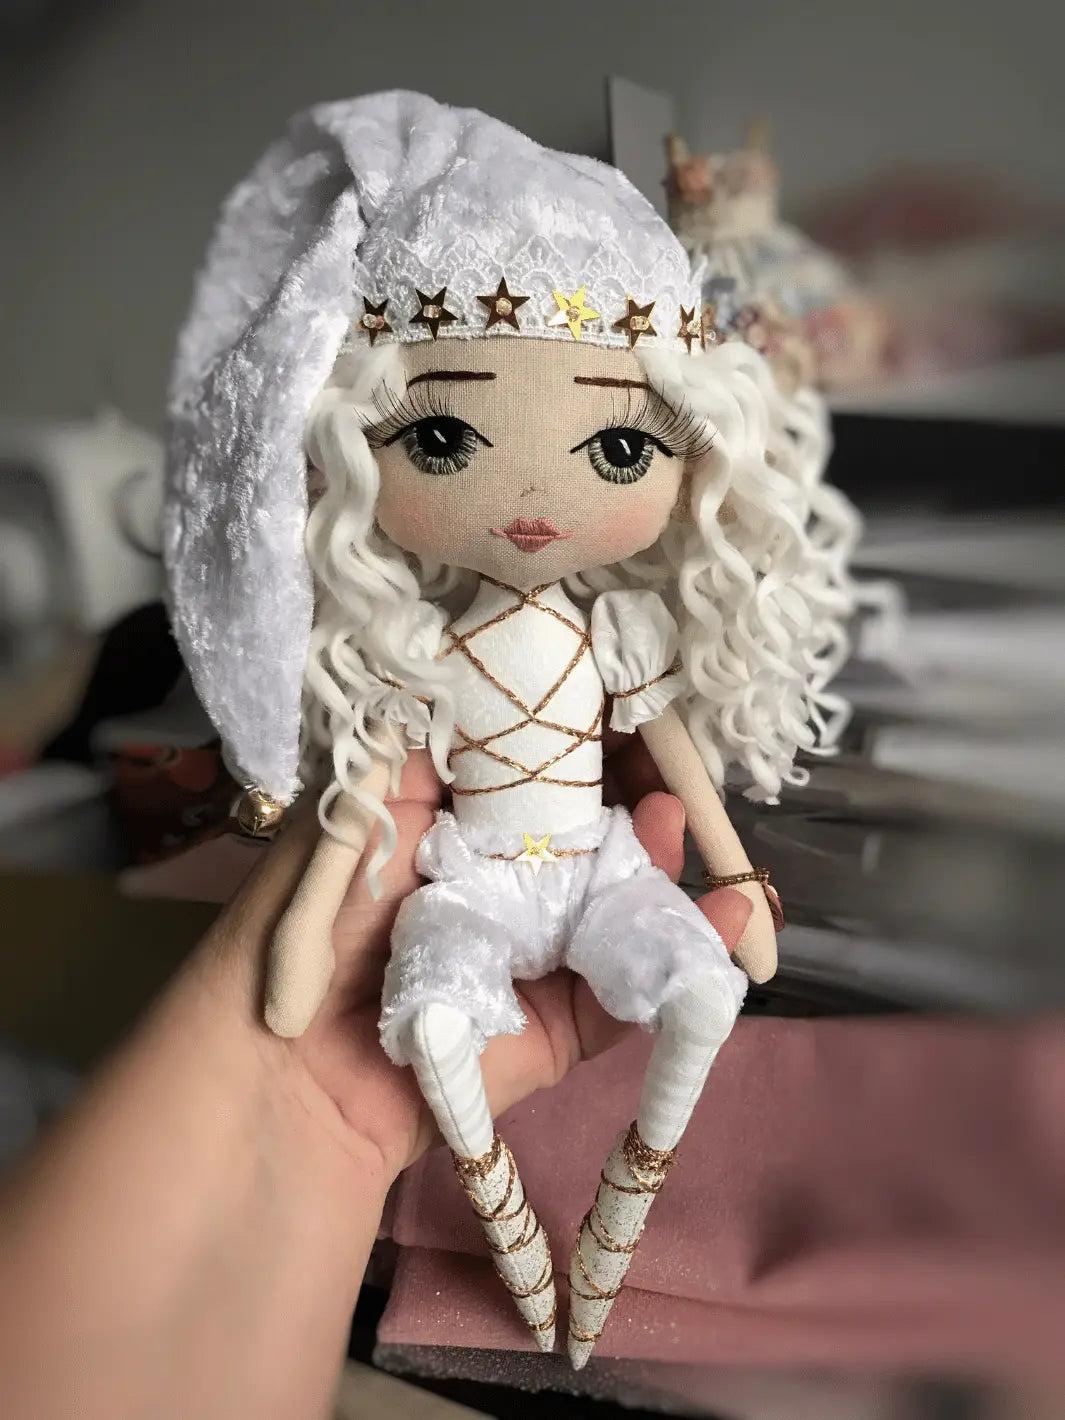 handmade christmas elf with bended legs to sit on a shelf, wearing white and gold outfit with hand embroidered green eyes; being held in a woman's hand